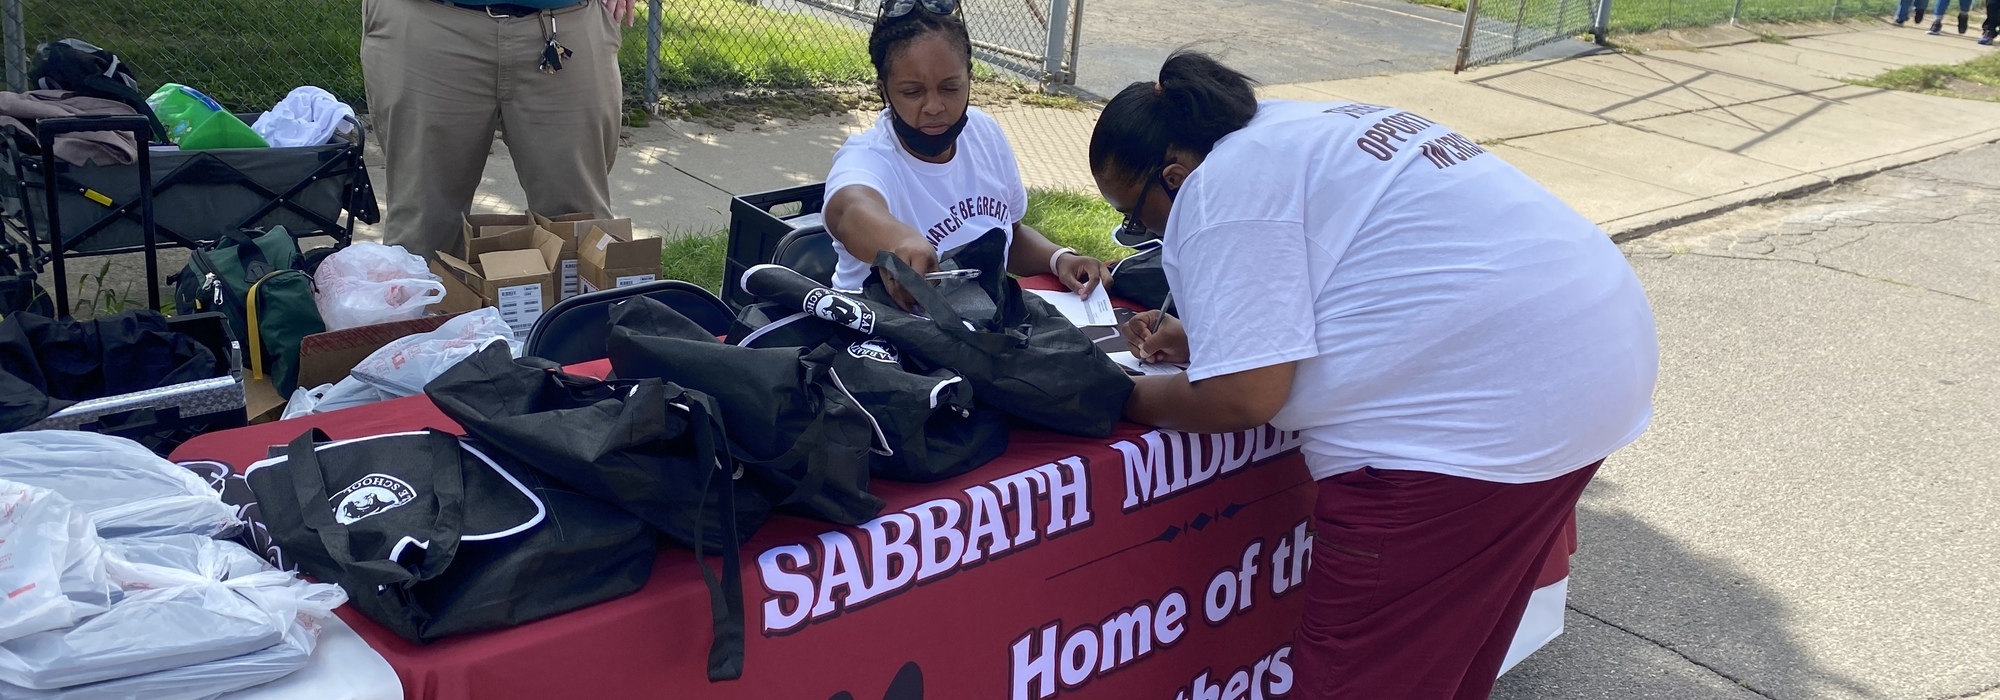 Sabbath school at the backpack giveaway handing out technology to students during the pandemic.